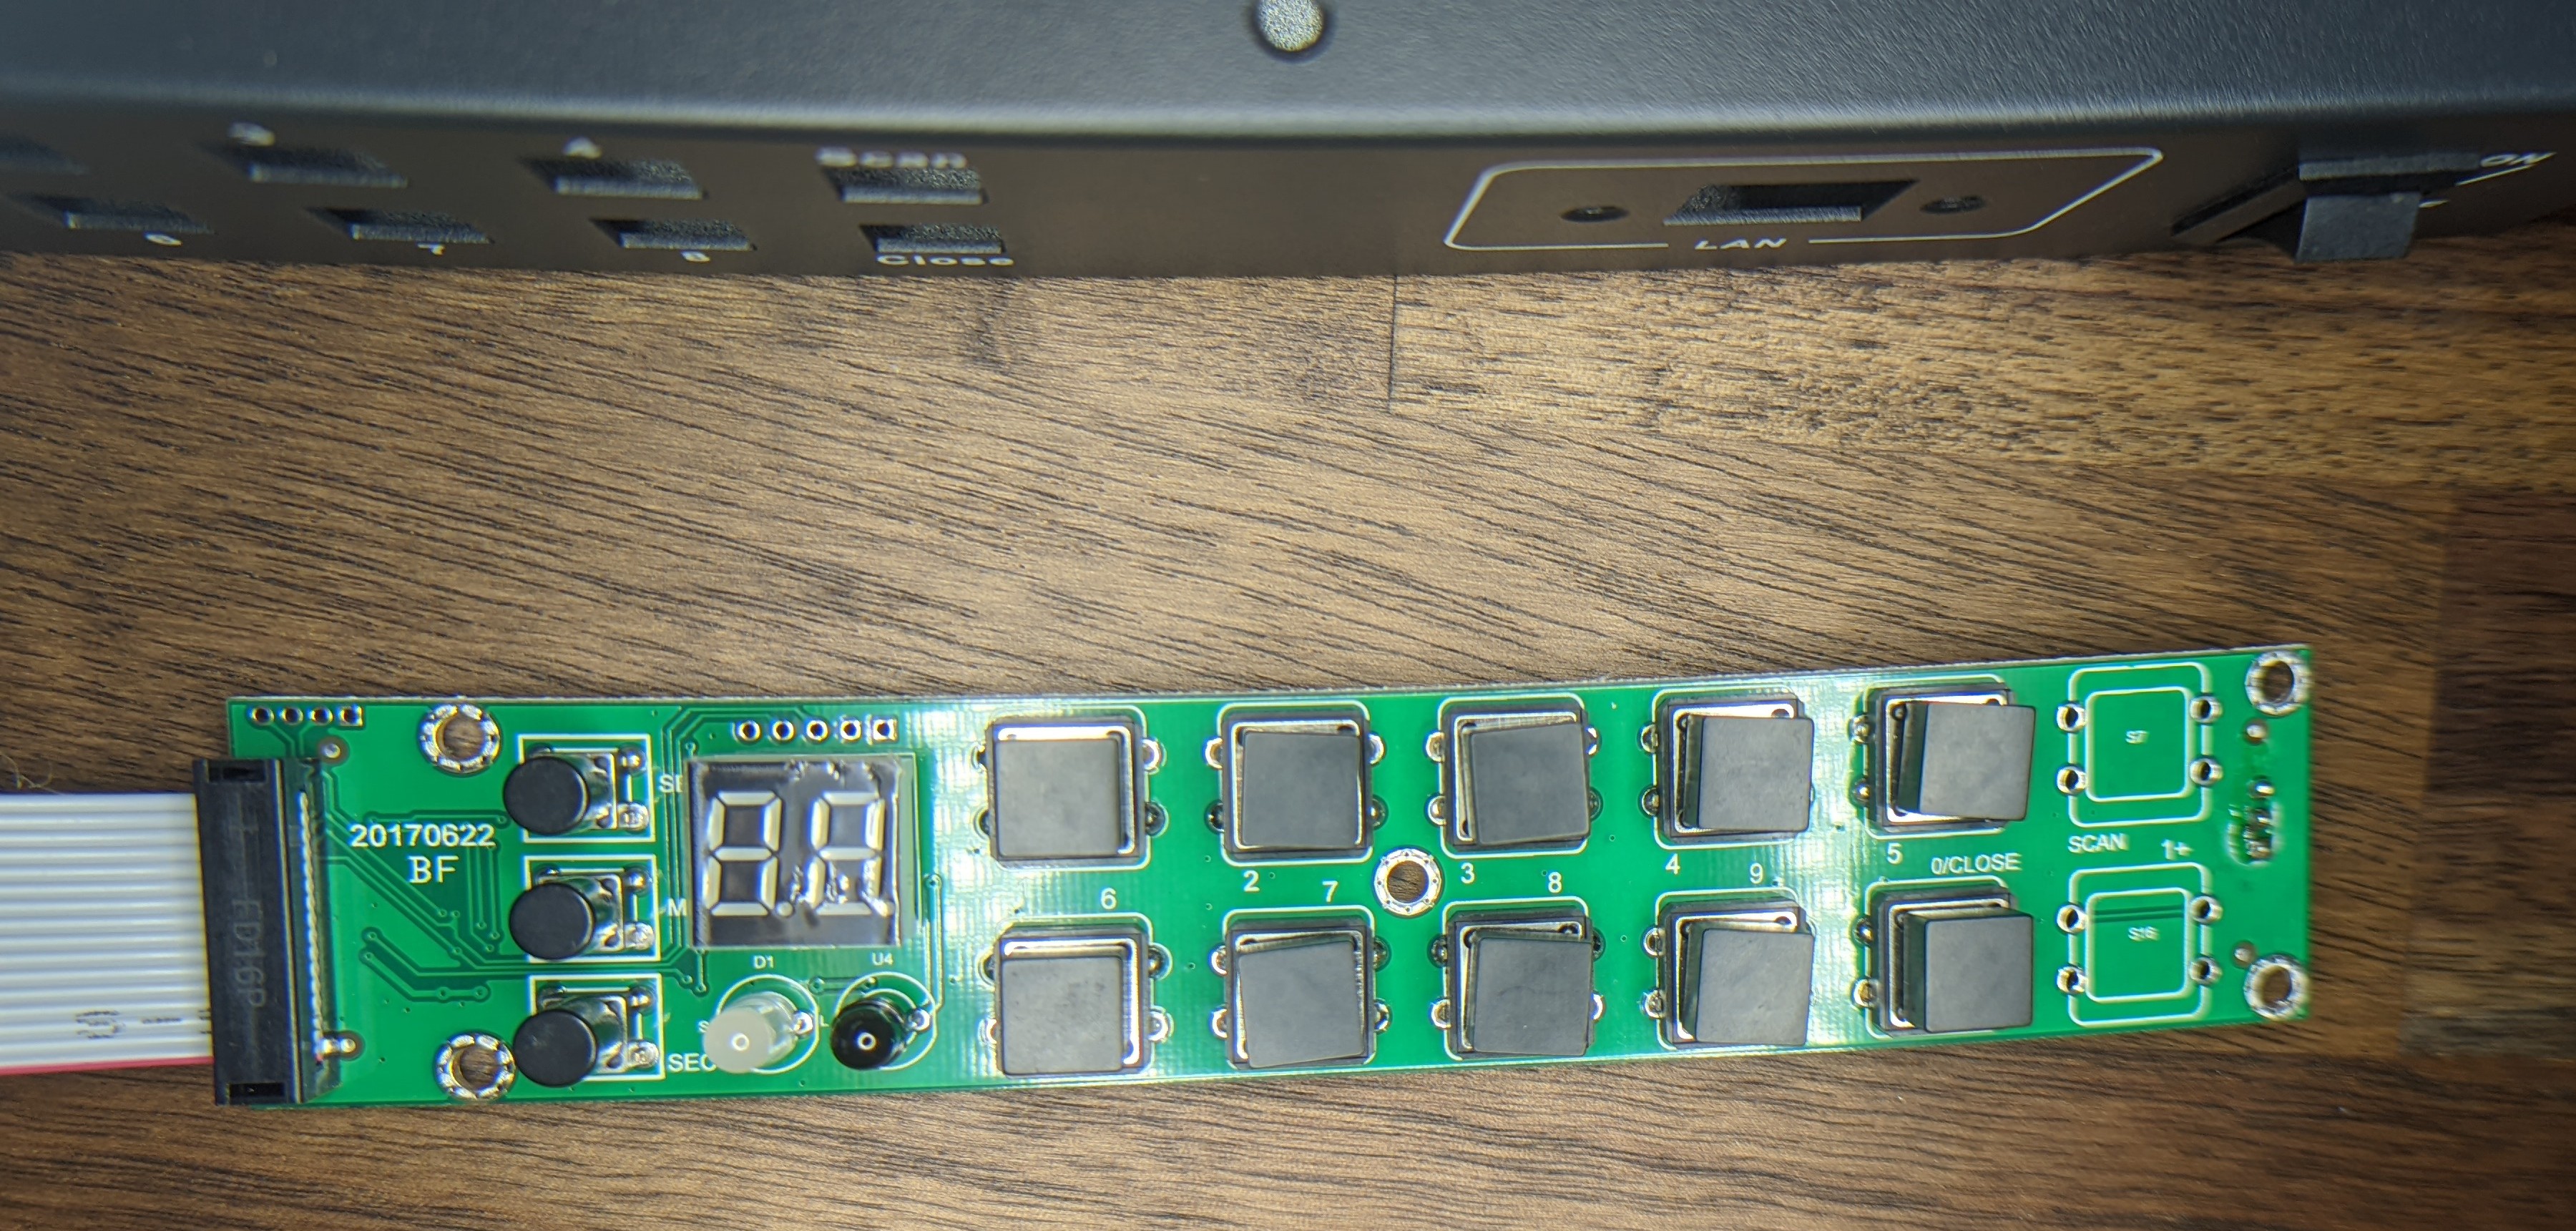 This PCB is means to be used in other SKUs that come with two extra buttons that are unpopulated here.